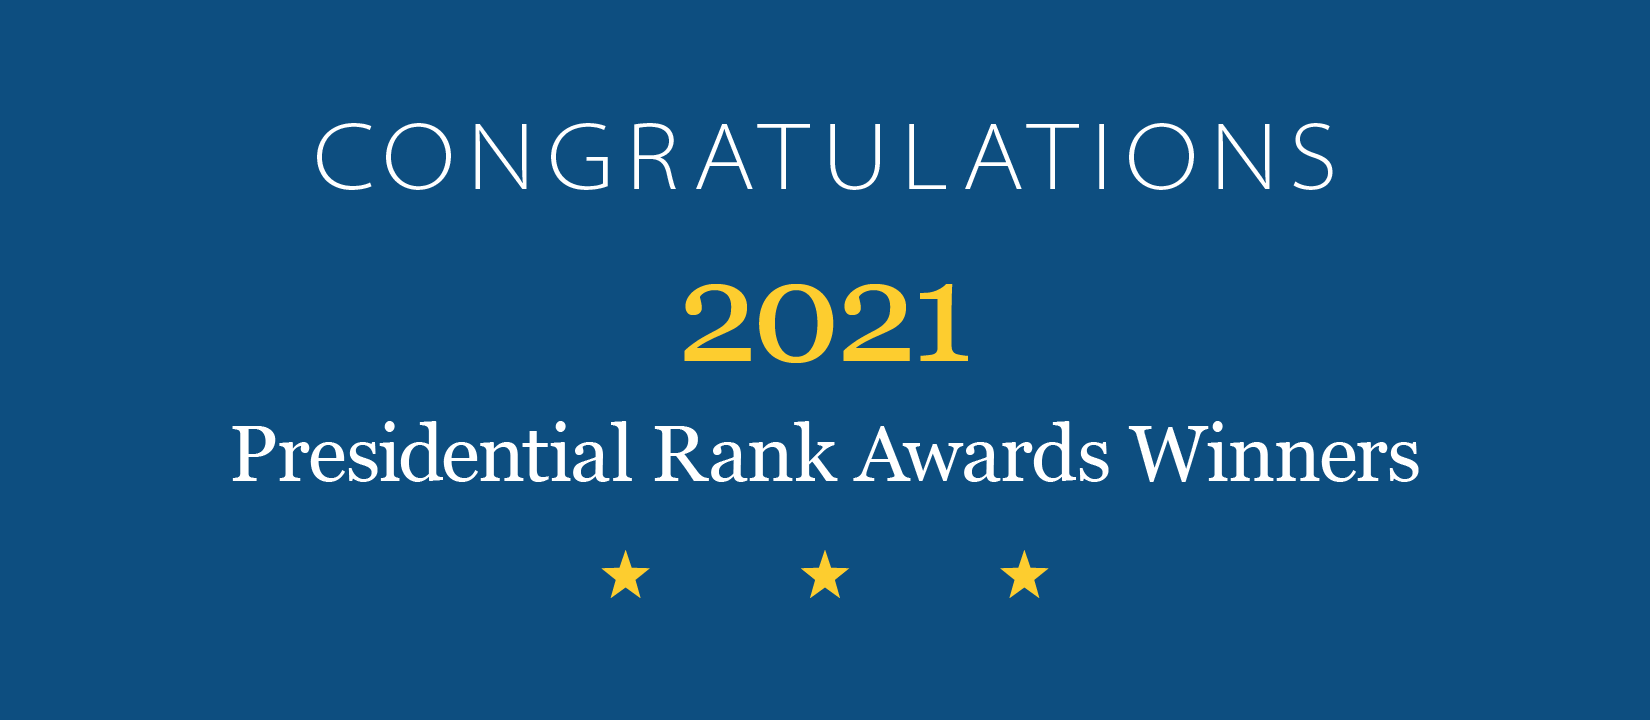 Congratulations 2021 Presidential Rank Awards Winners on a blue background with three yellow stars at the bottom